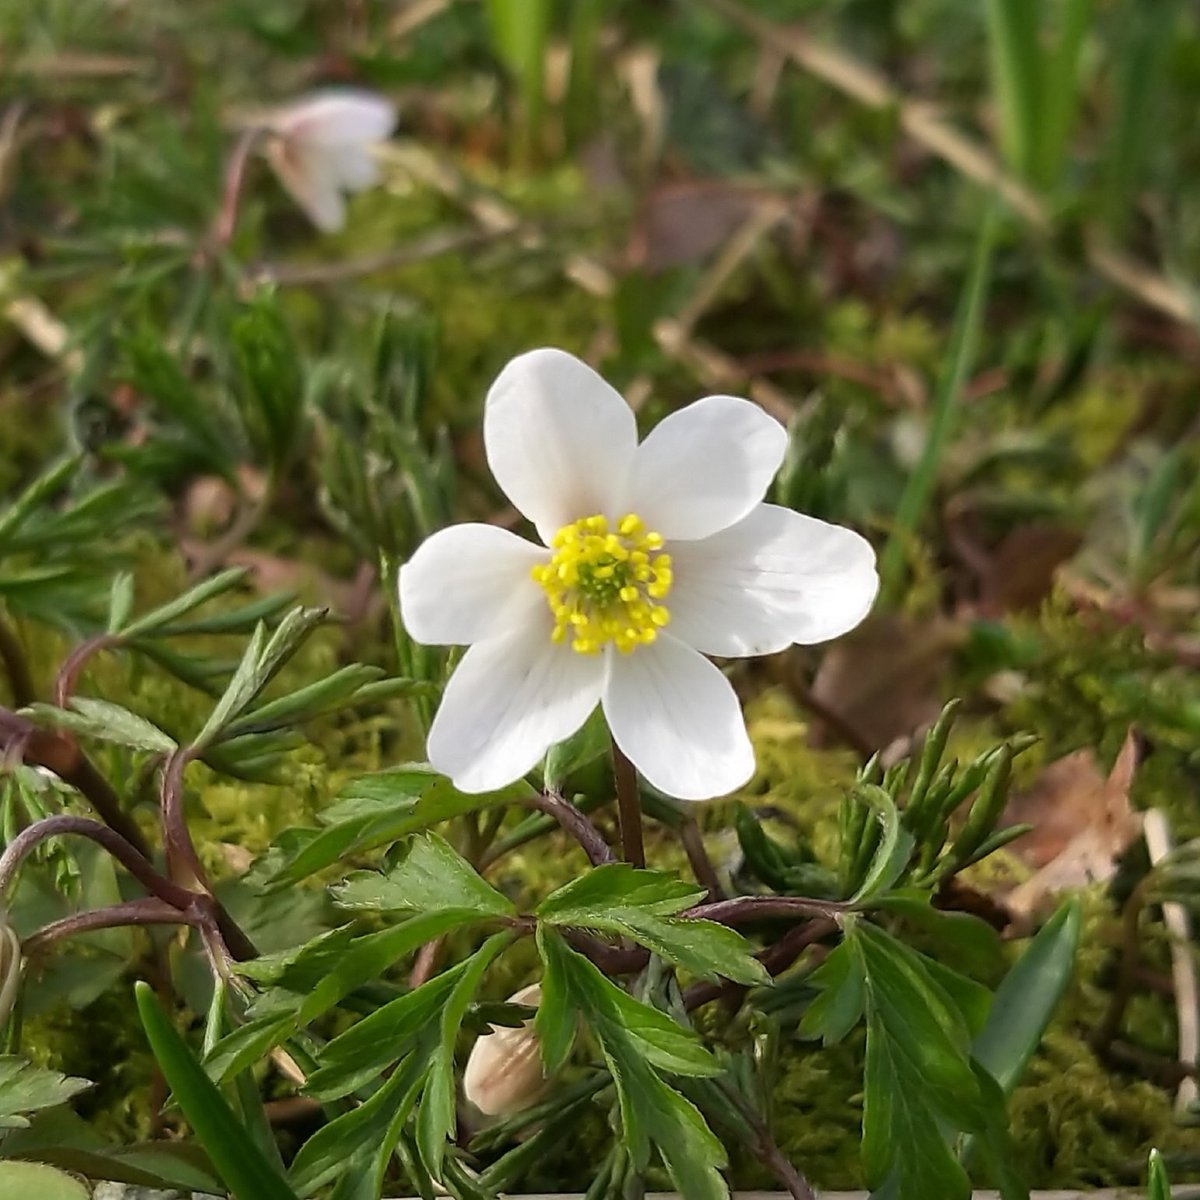 Anemone nemorosa; the common name is 'wood anemone' in Cumbrian dialect, it's 'billy-buttons' never pick an anemone flower as it will bring you bad luck #folklore #wildflowers #cumbria